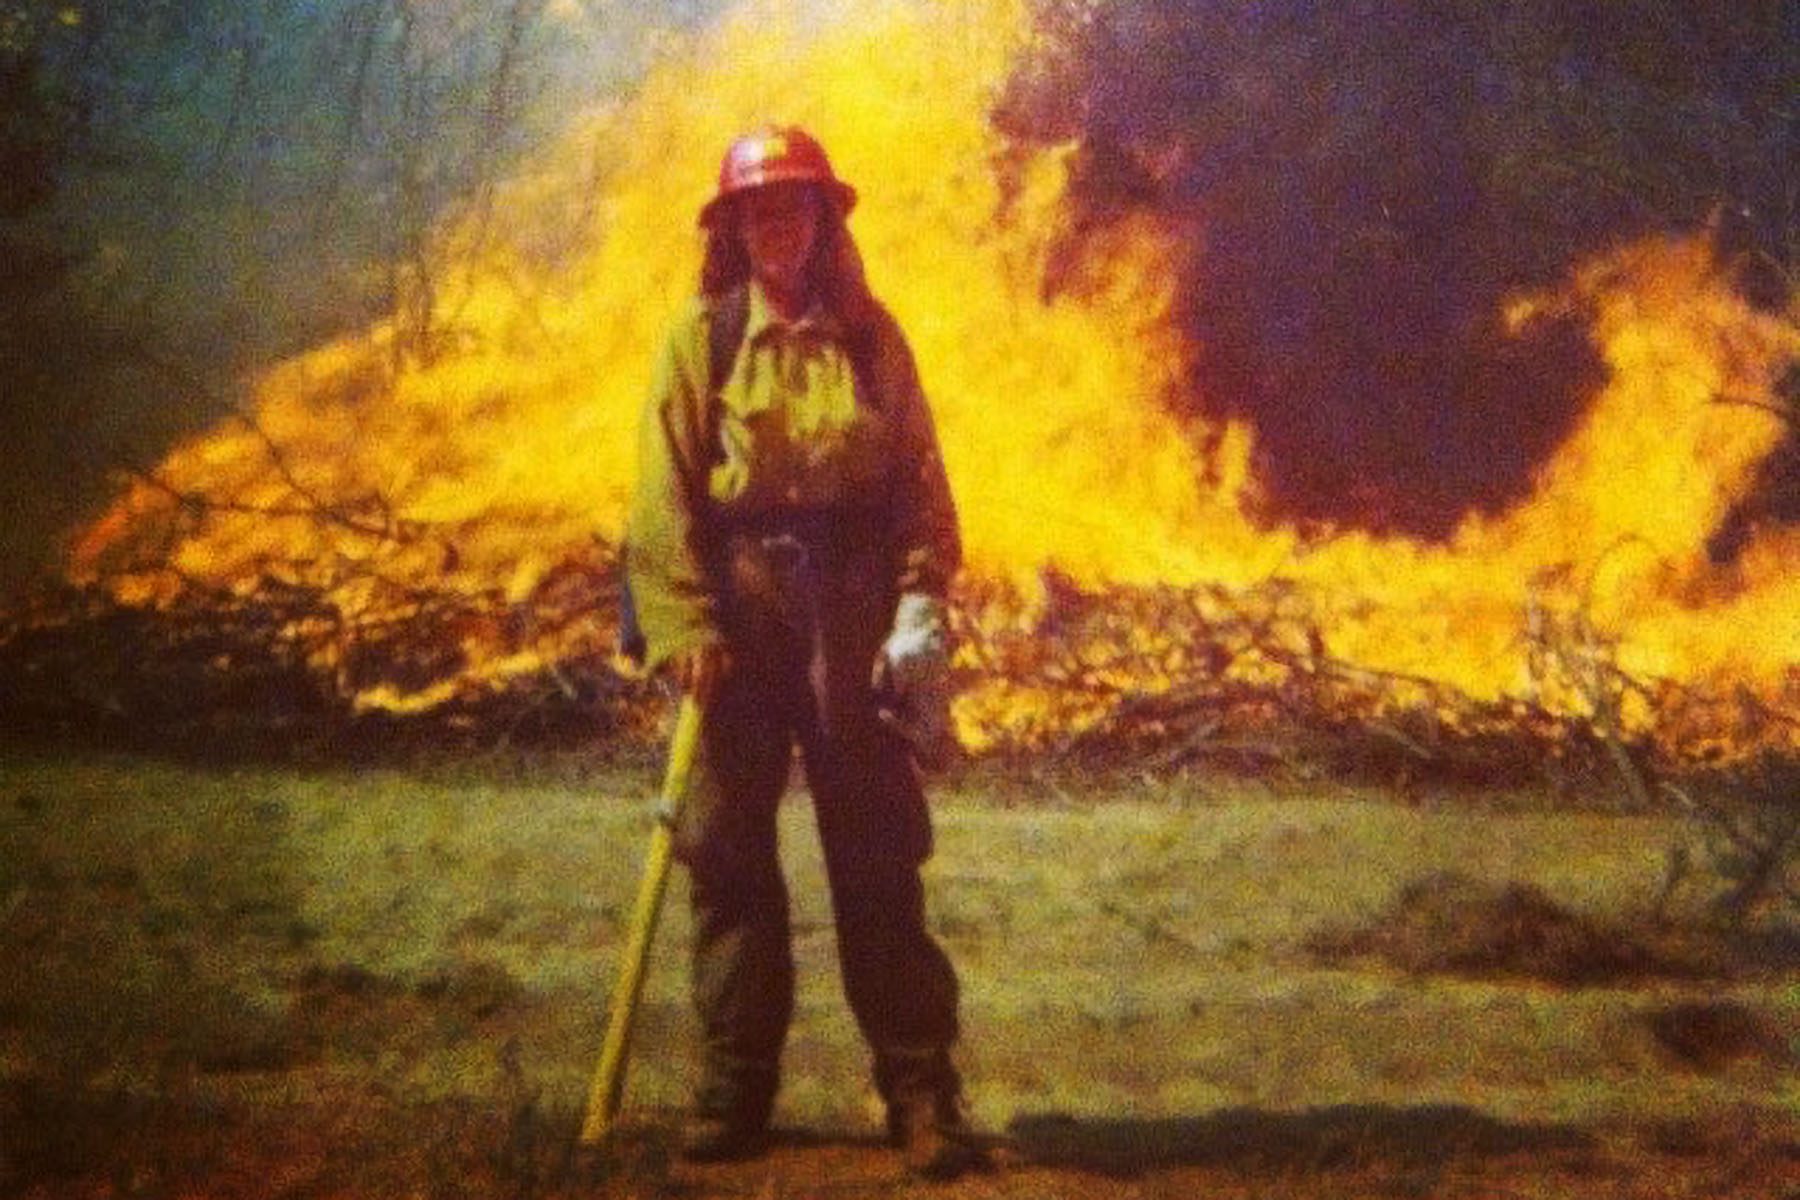 Stacy Selby poses for a photo in front of a fire.